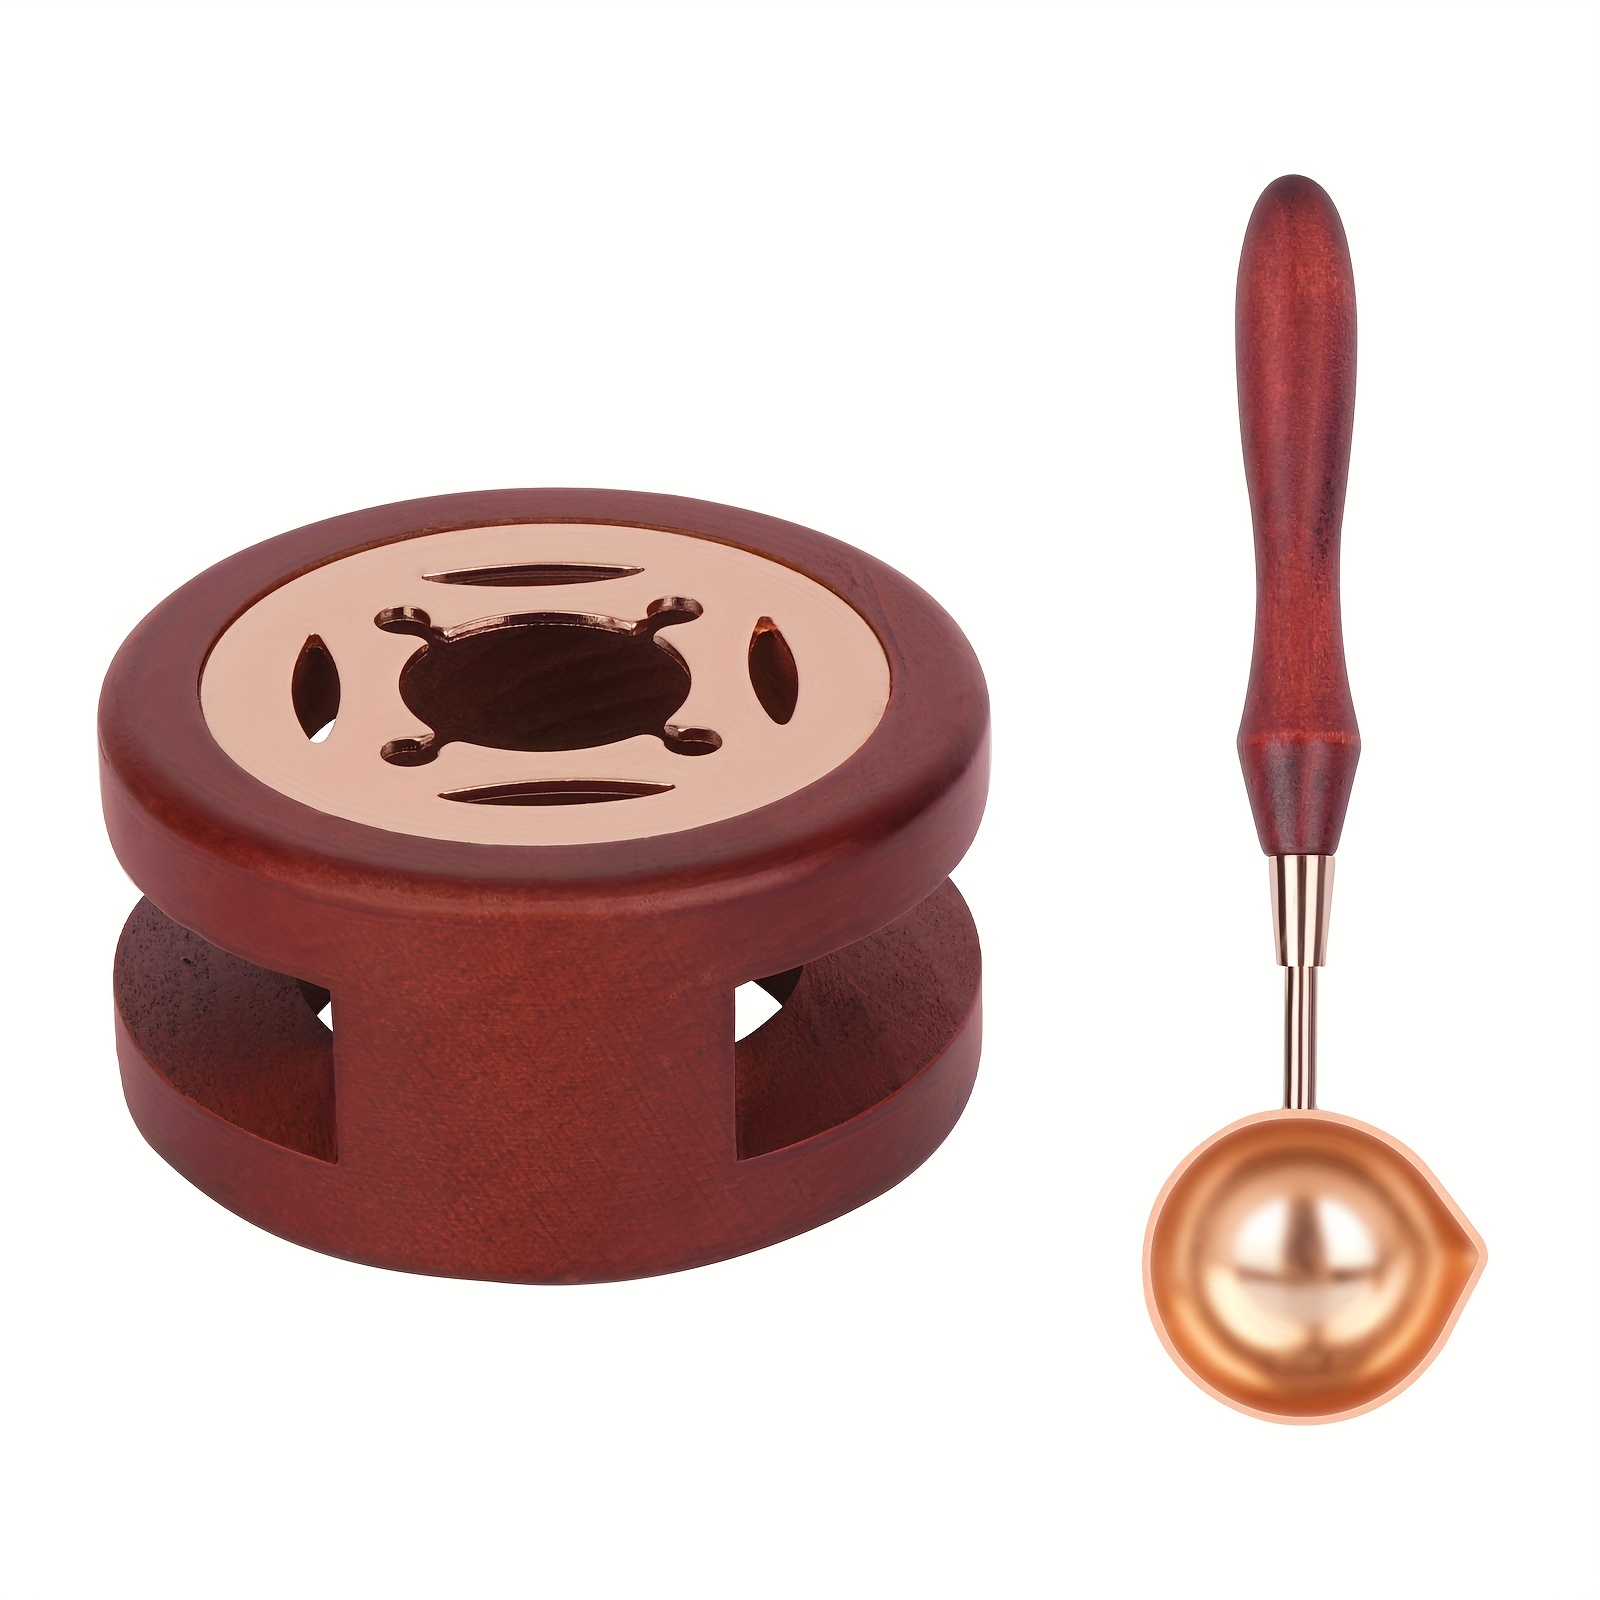 Wax Seal Warmer with Melting Spoon for Wax Sealing Stamp Envelope